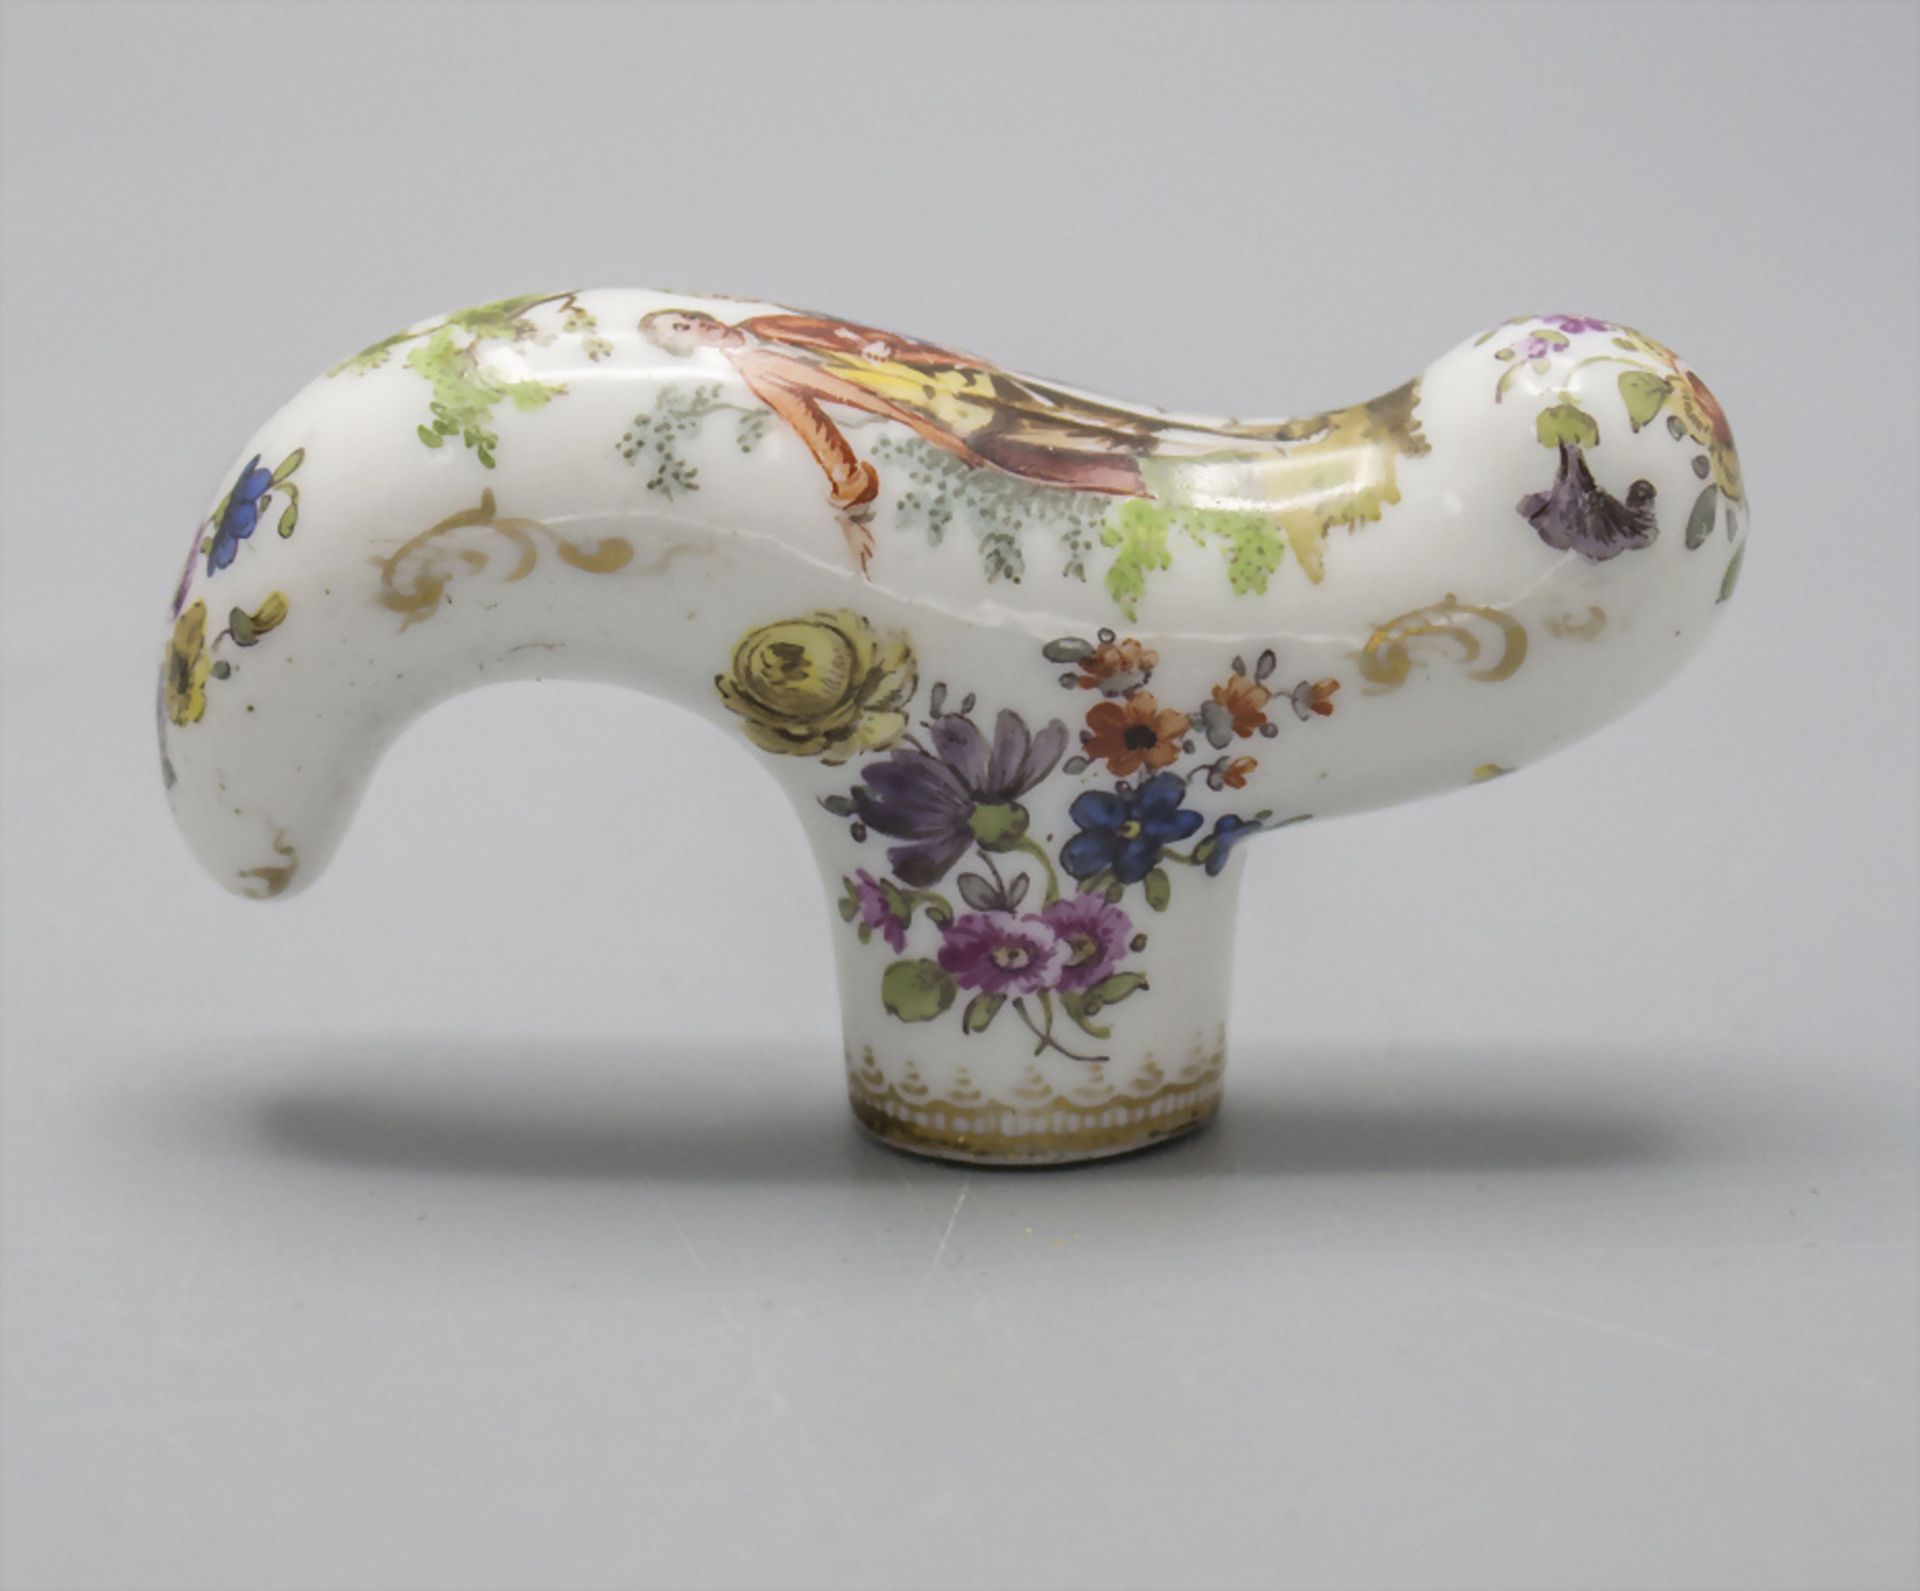 Stockgriff mit Watteauszene / A cane handle with courting scene, wohl Meissen, 19. Jh.